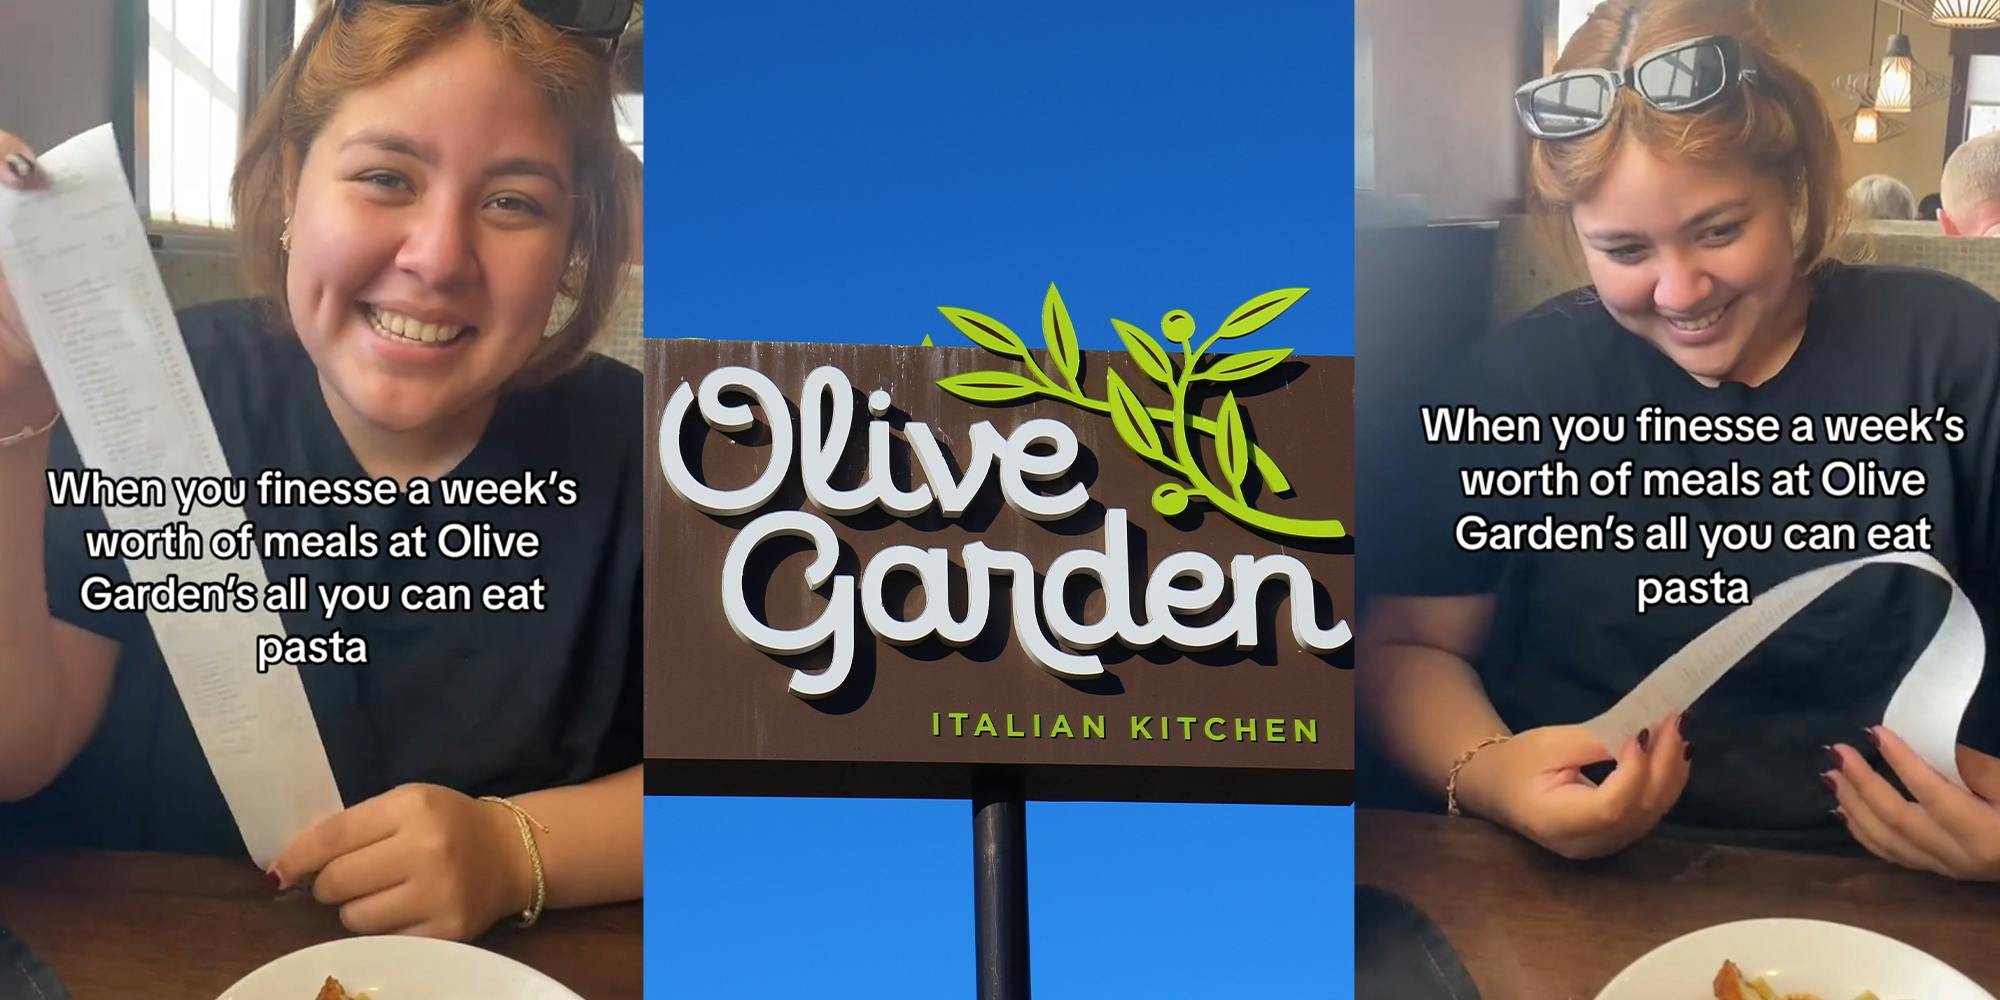 Olive Garden customer ‘finesses’ weeks’ worth of meals with the all-you-can-eat pasta deal